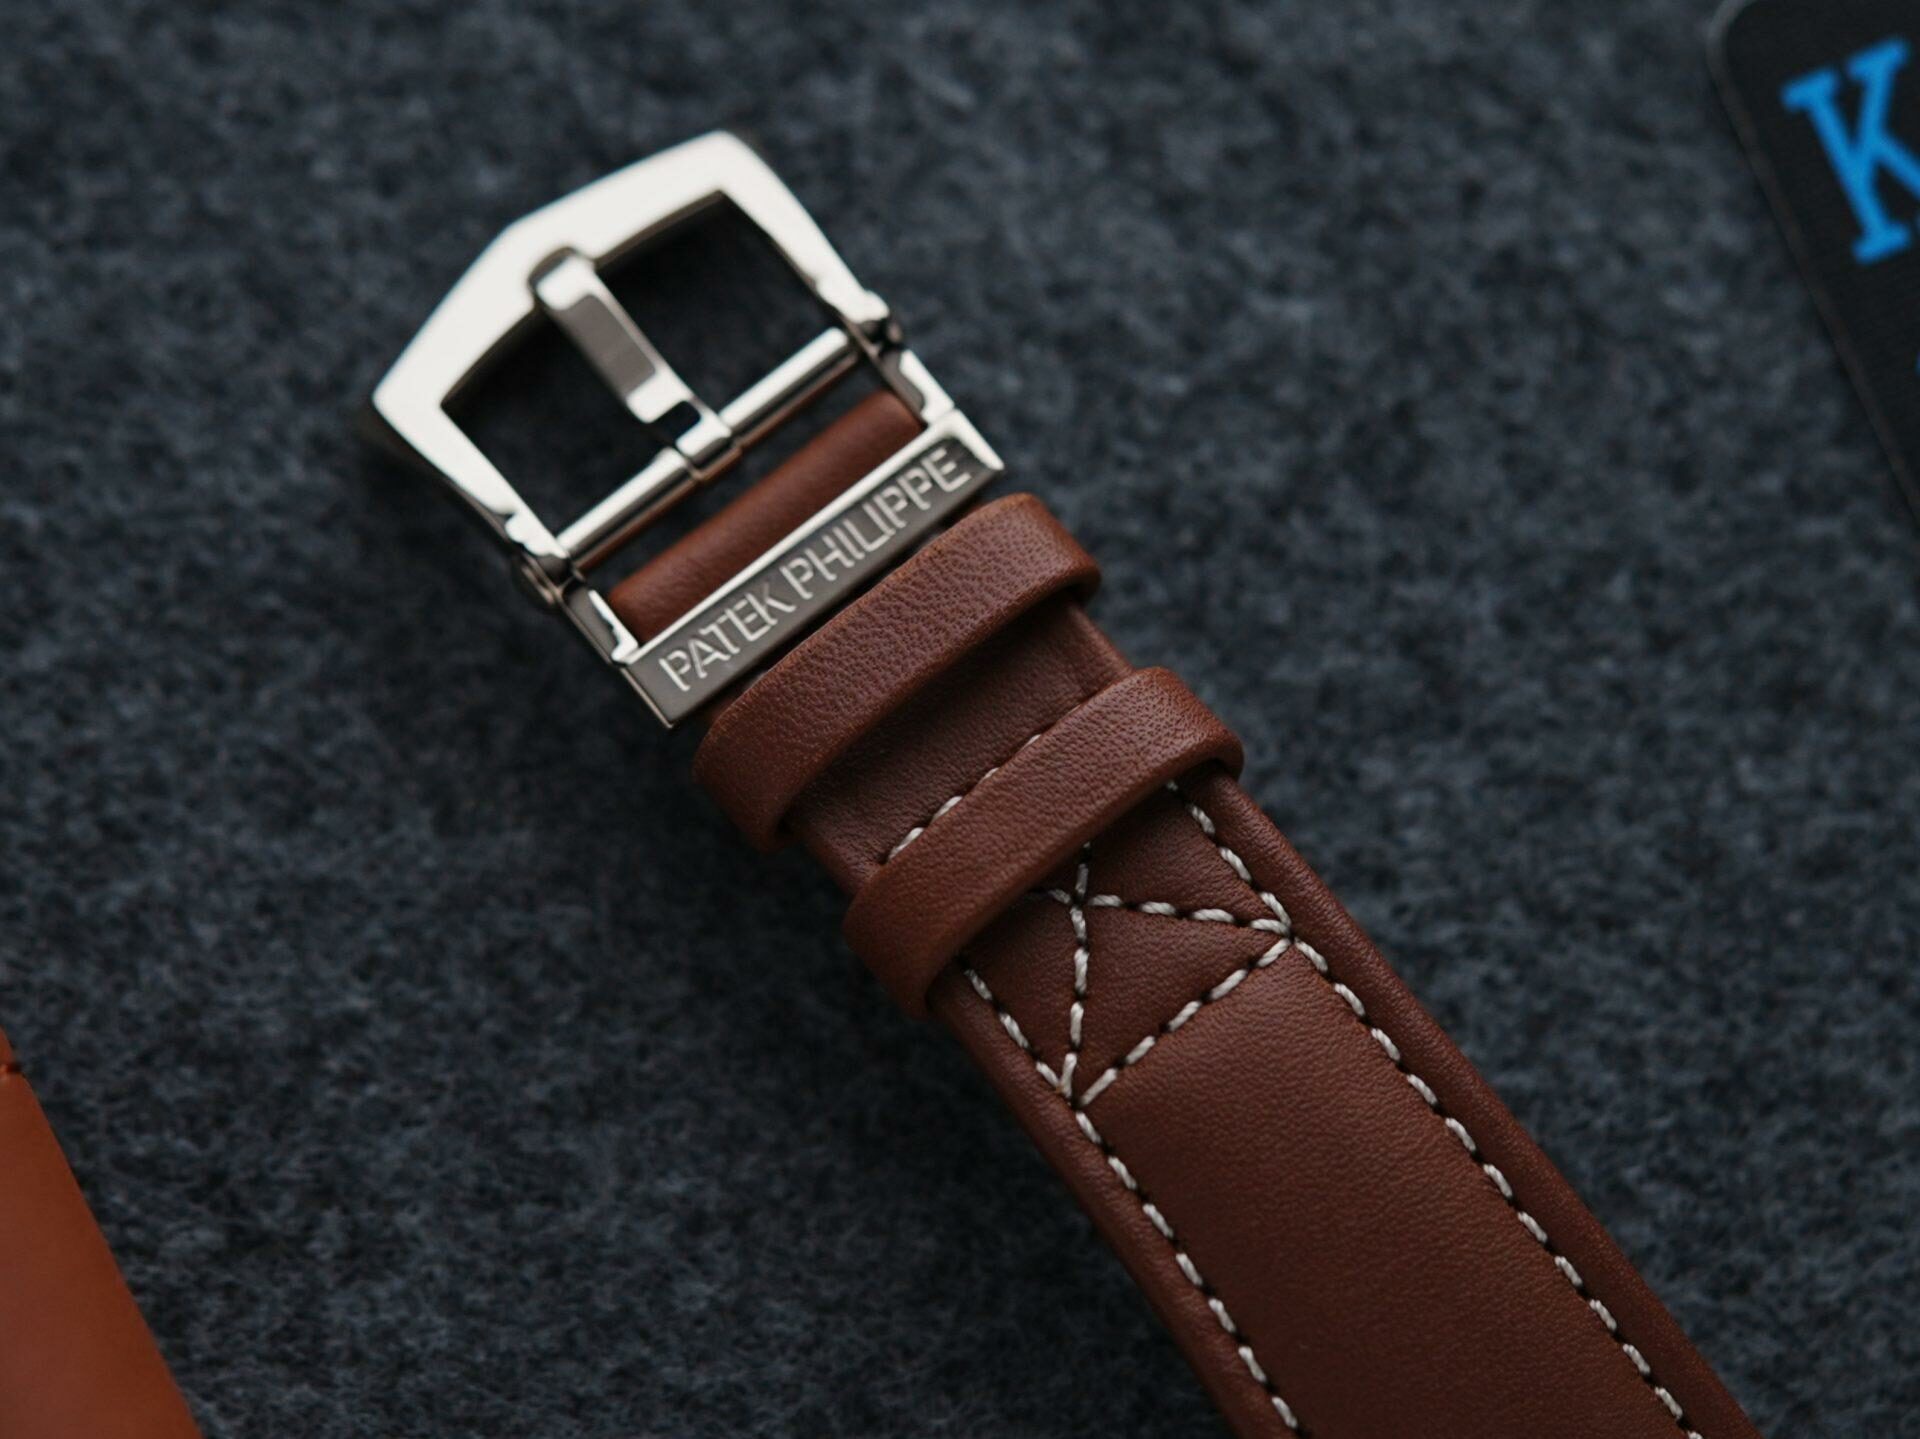 Leather strap and Buckle for the Patek Philippe Annual Calendar Chronograph.